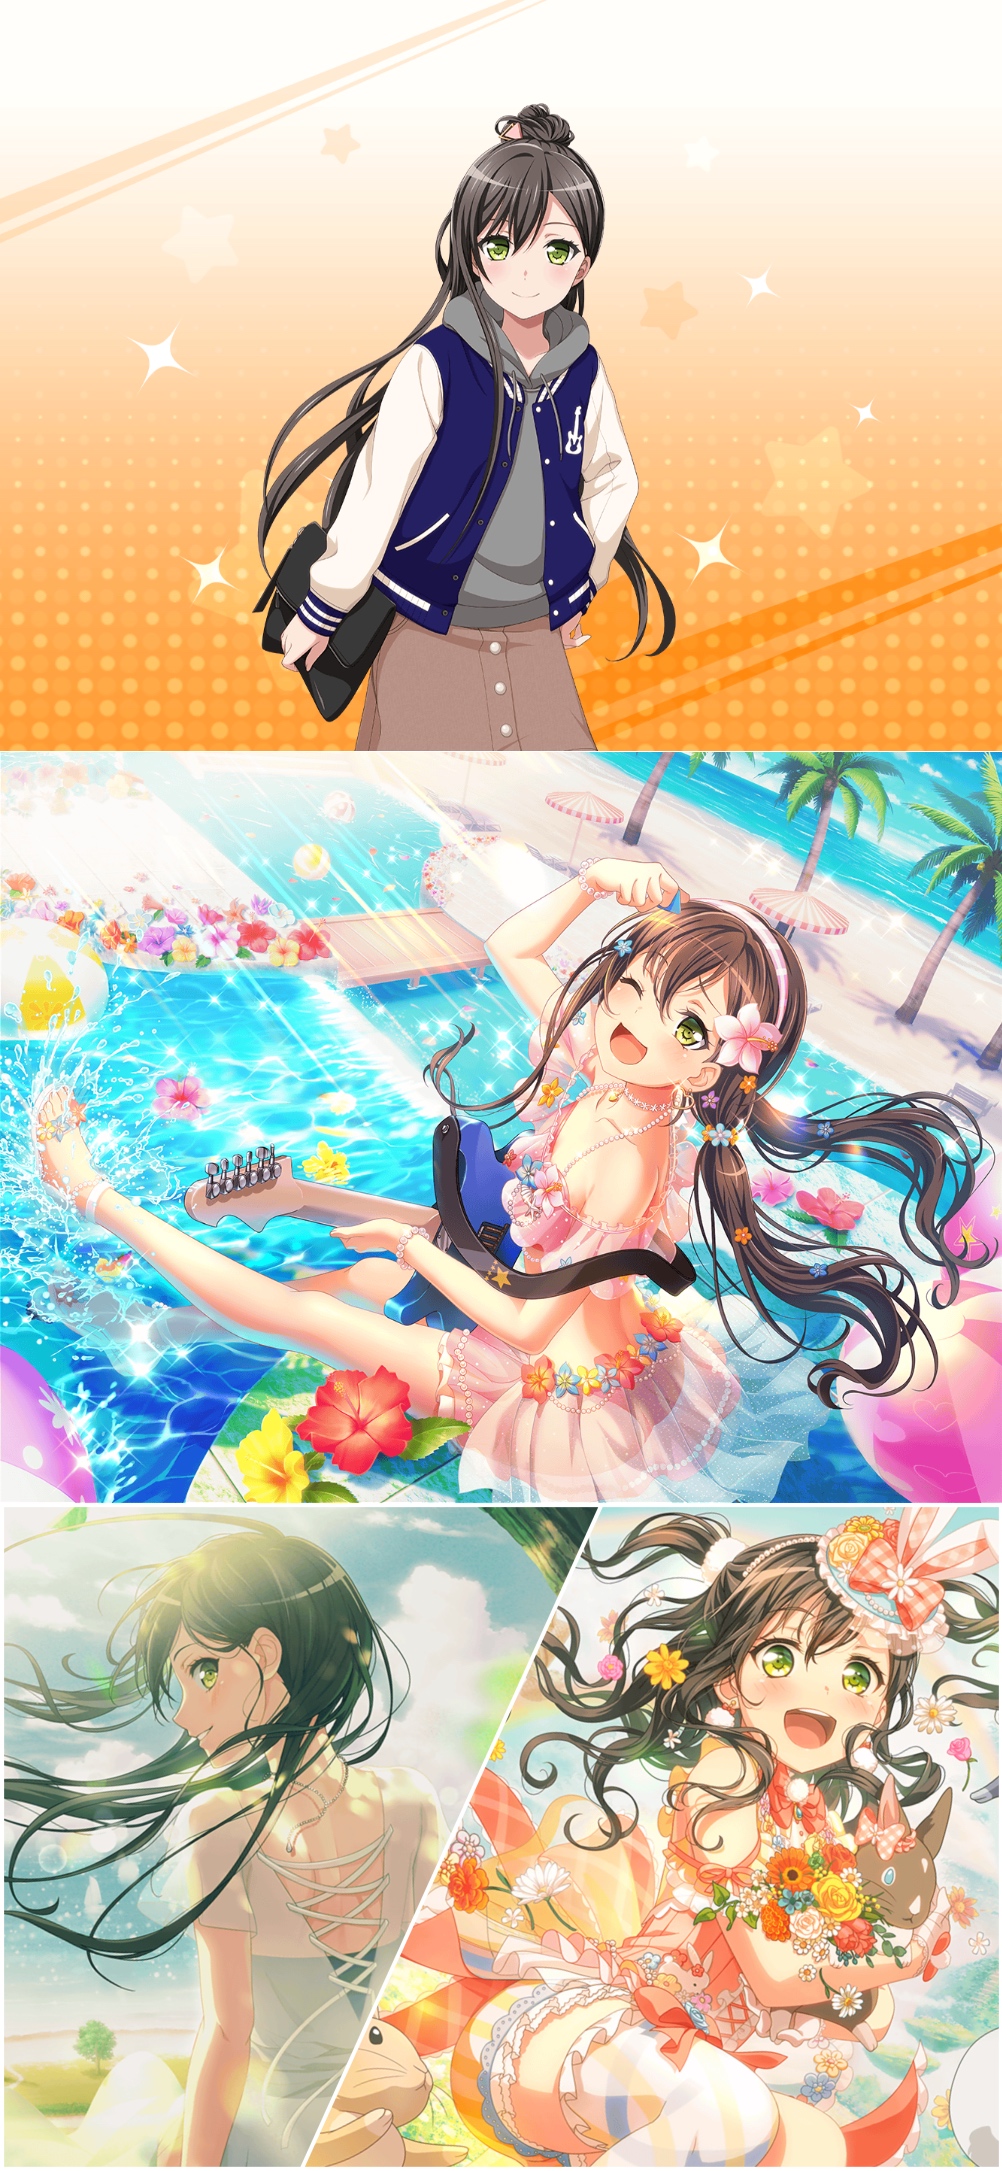 Trained versions of the 3☆ cards for - I Love BanG Dream